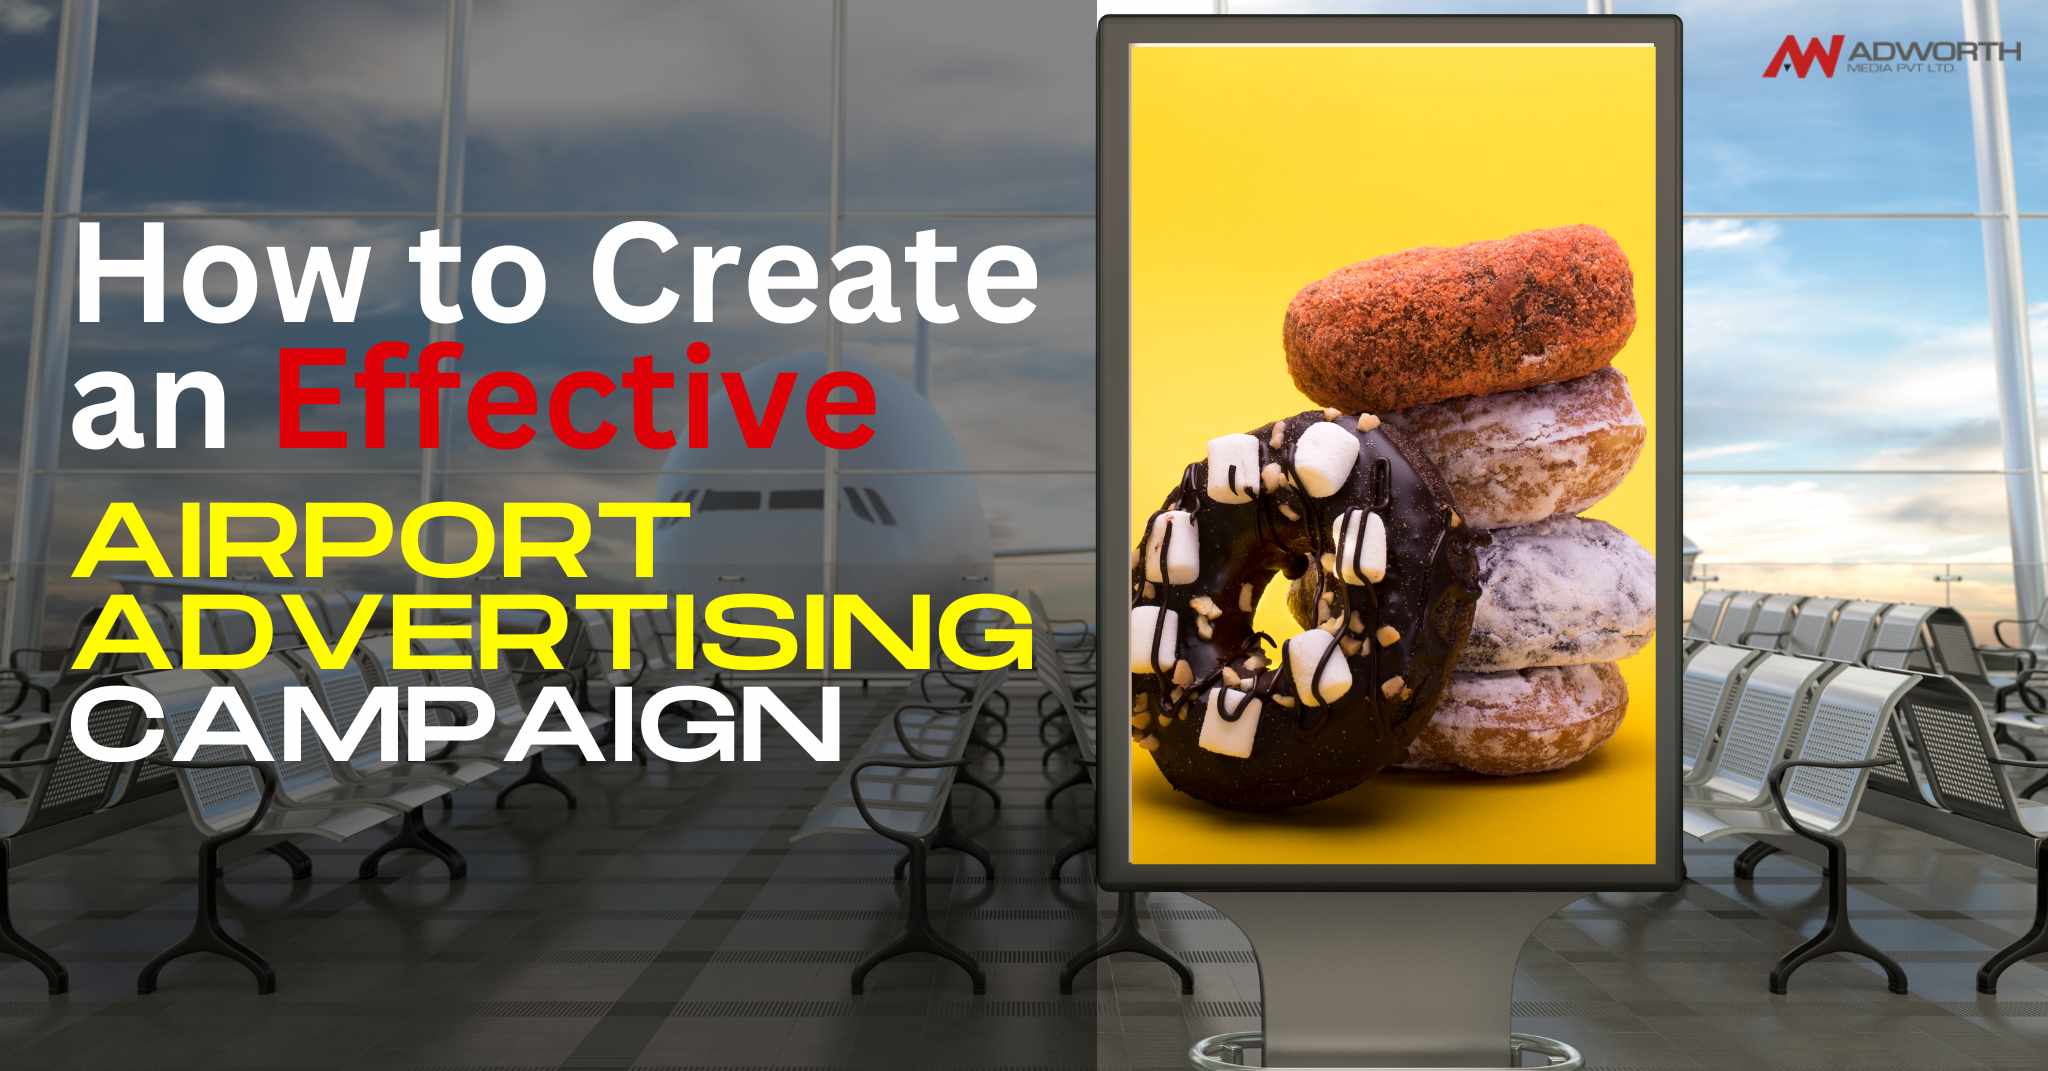 How to Create an Effective Airport Advertising Campaign